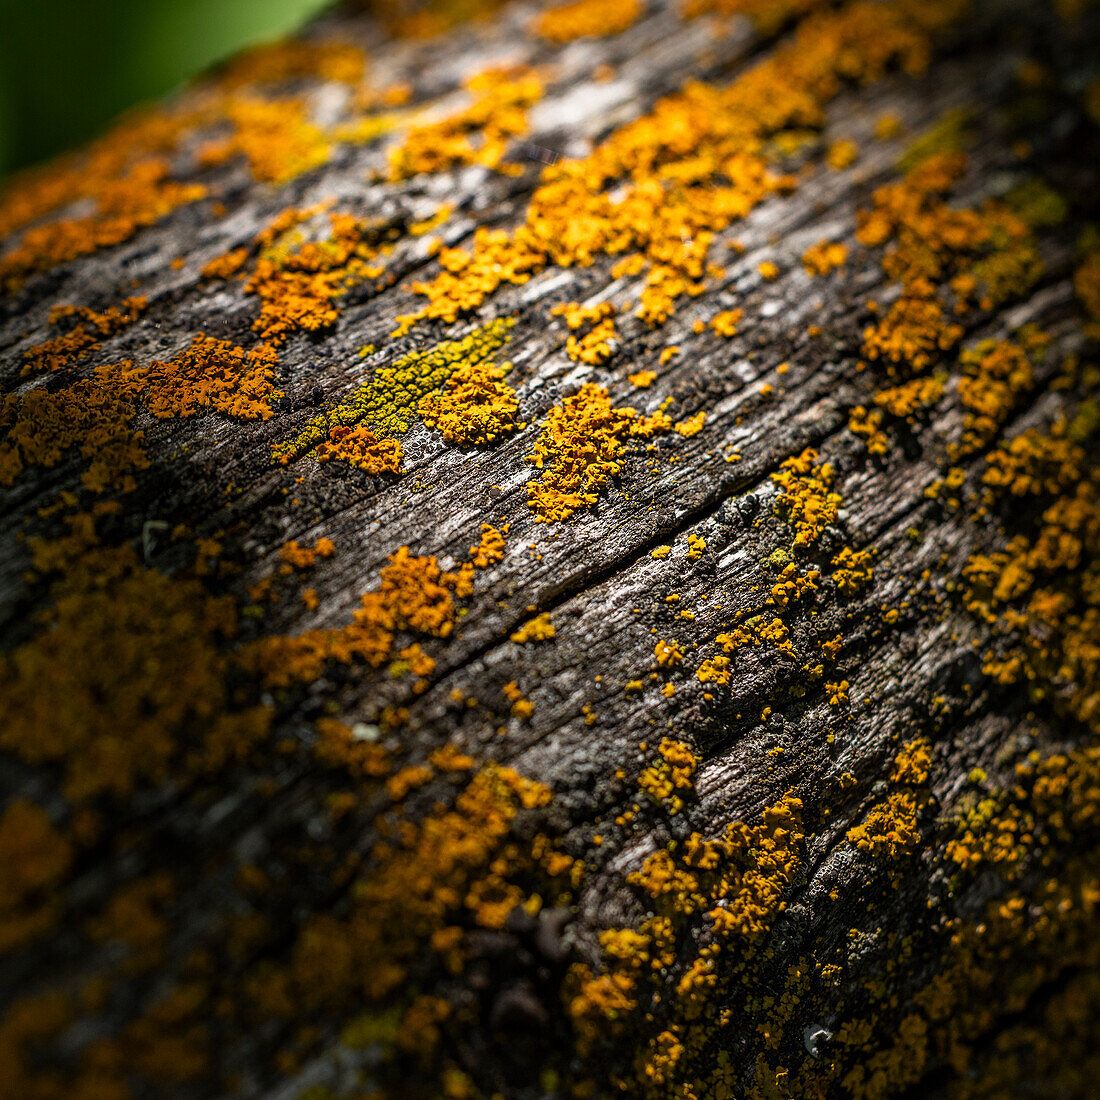 Close-up of lichen growing on wooden fence railing\n